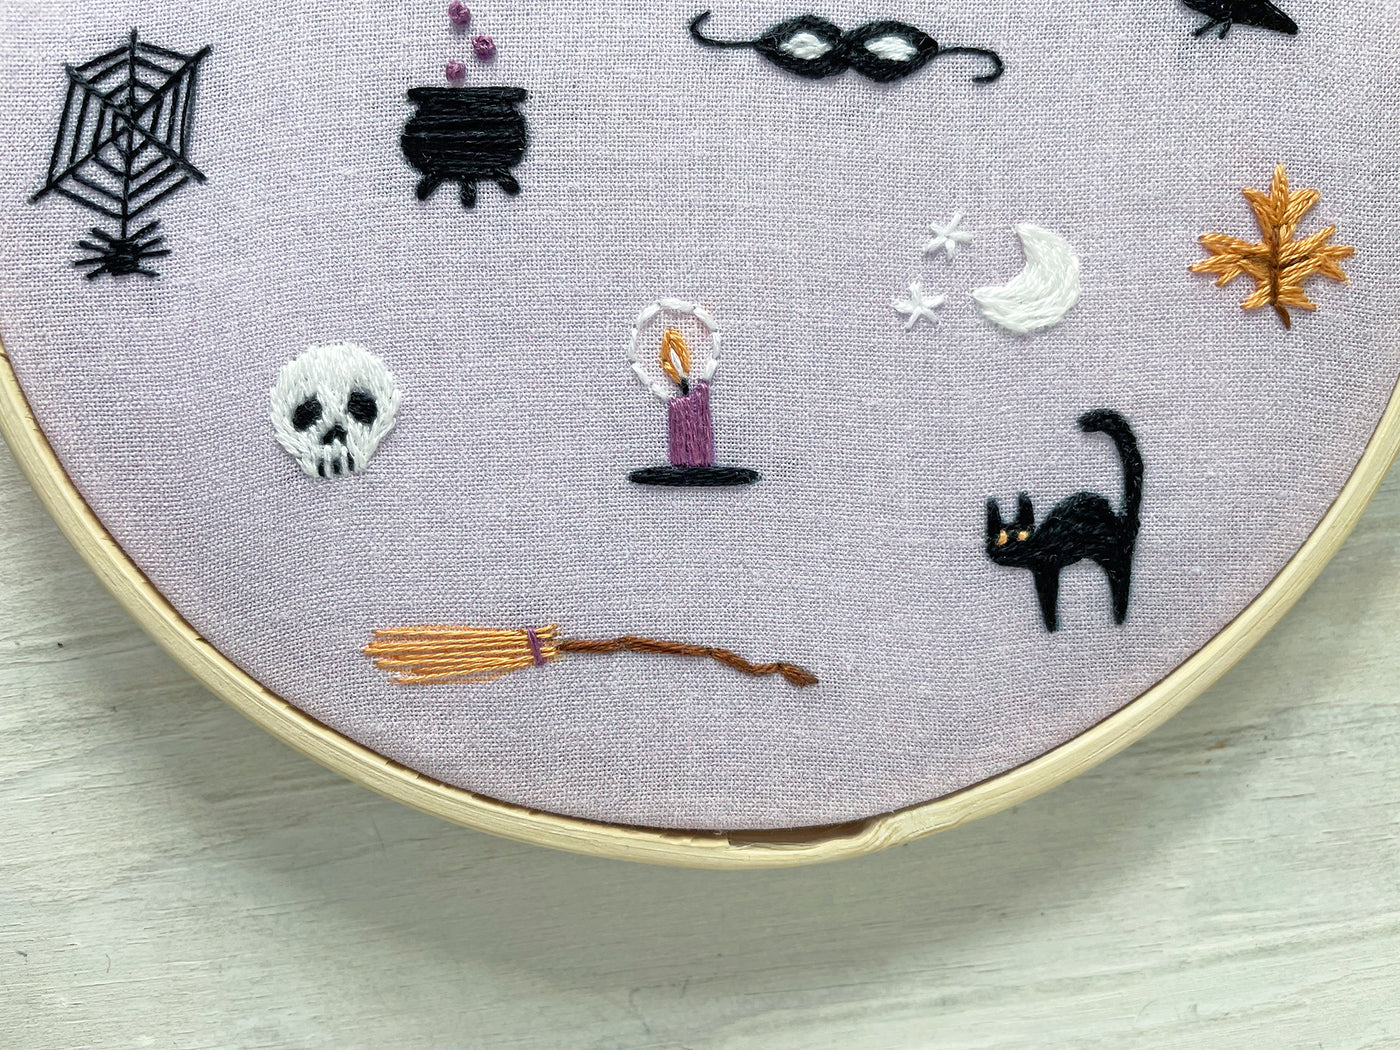 Tiny Halloween Motifs Hand Embroidery PDF pattern download